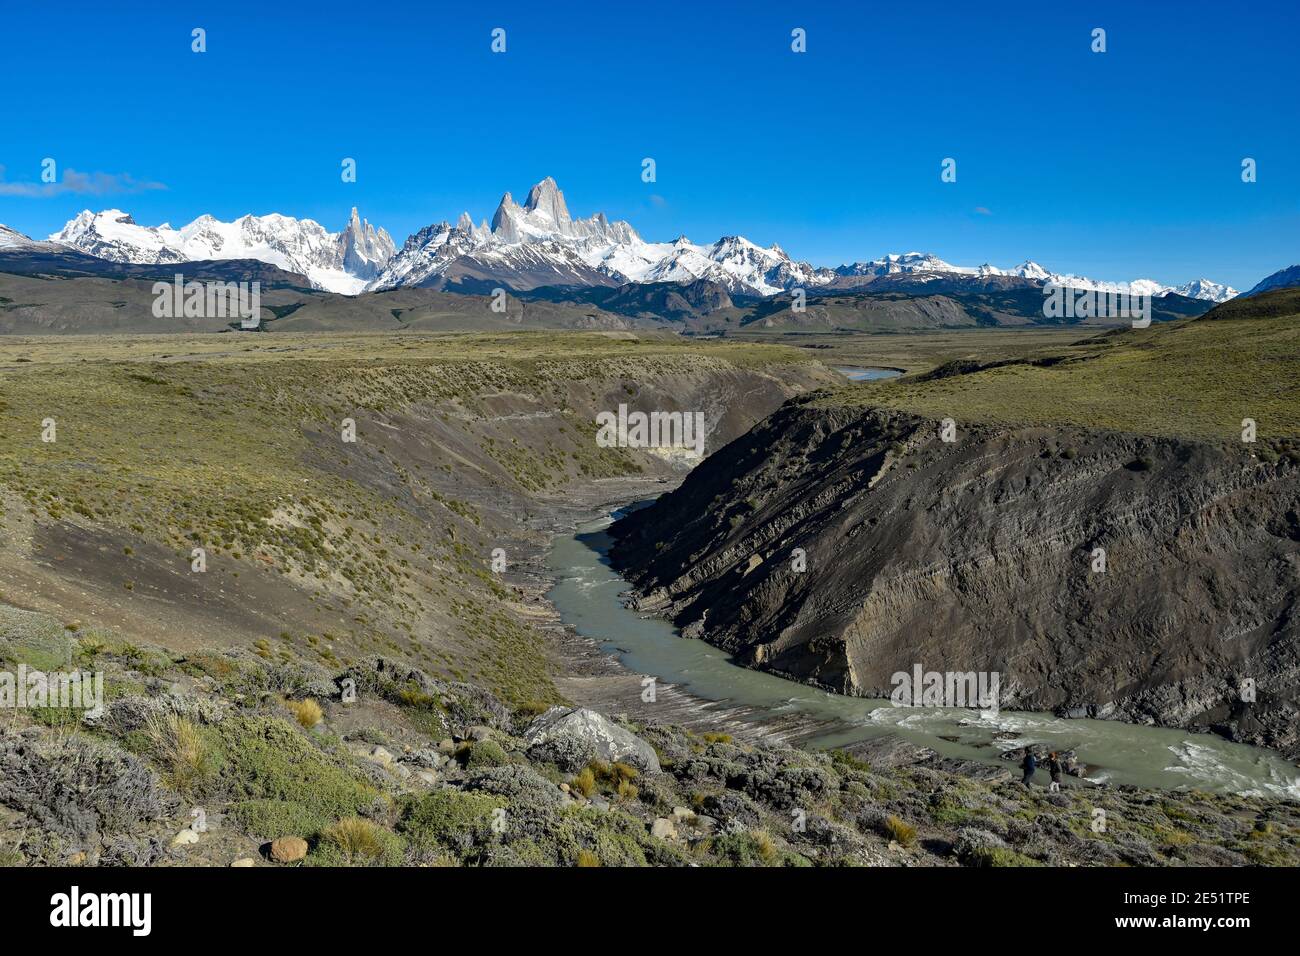 beautiful patagonia mountain scenery near El Chalten with mountains Fitz Roy and Cerro Torre, in the front is the Las Vueltas river Stock Photo